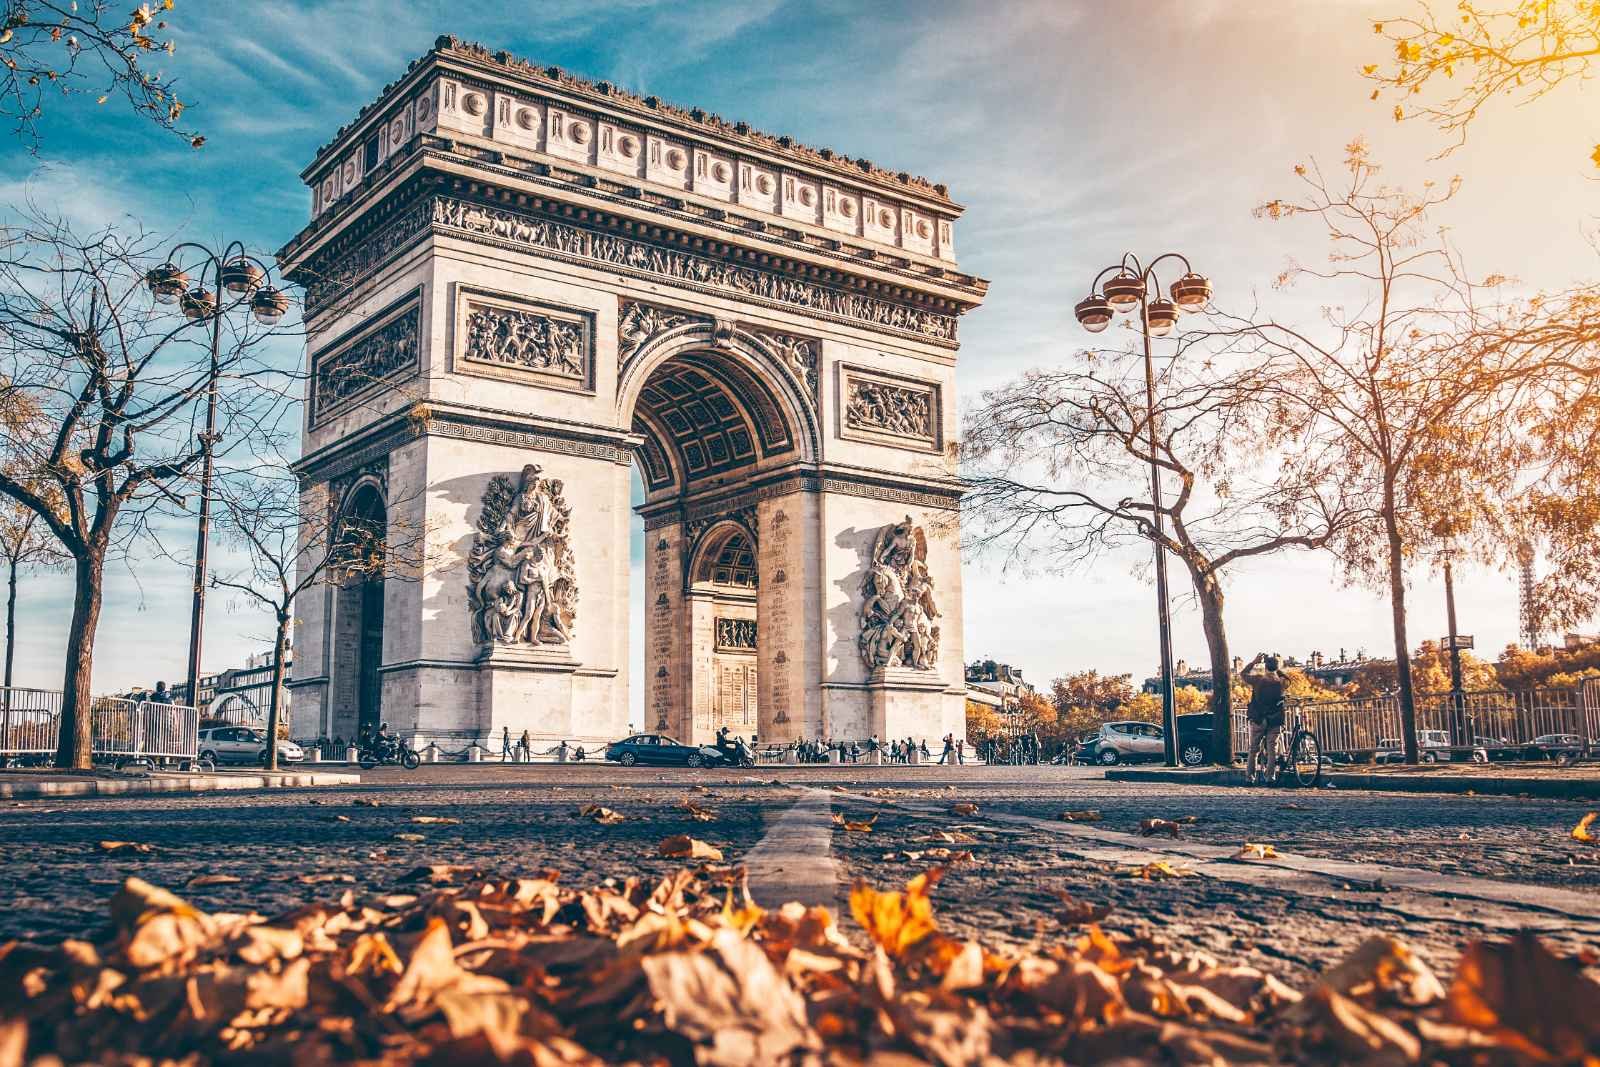 Paris in October: Weather, Fall Tips, And What to Expect